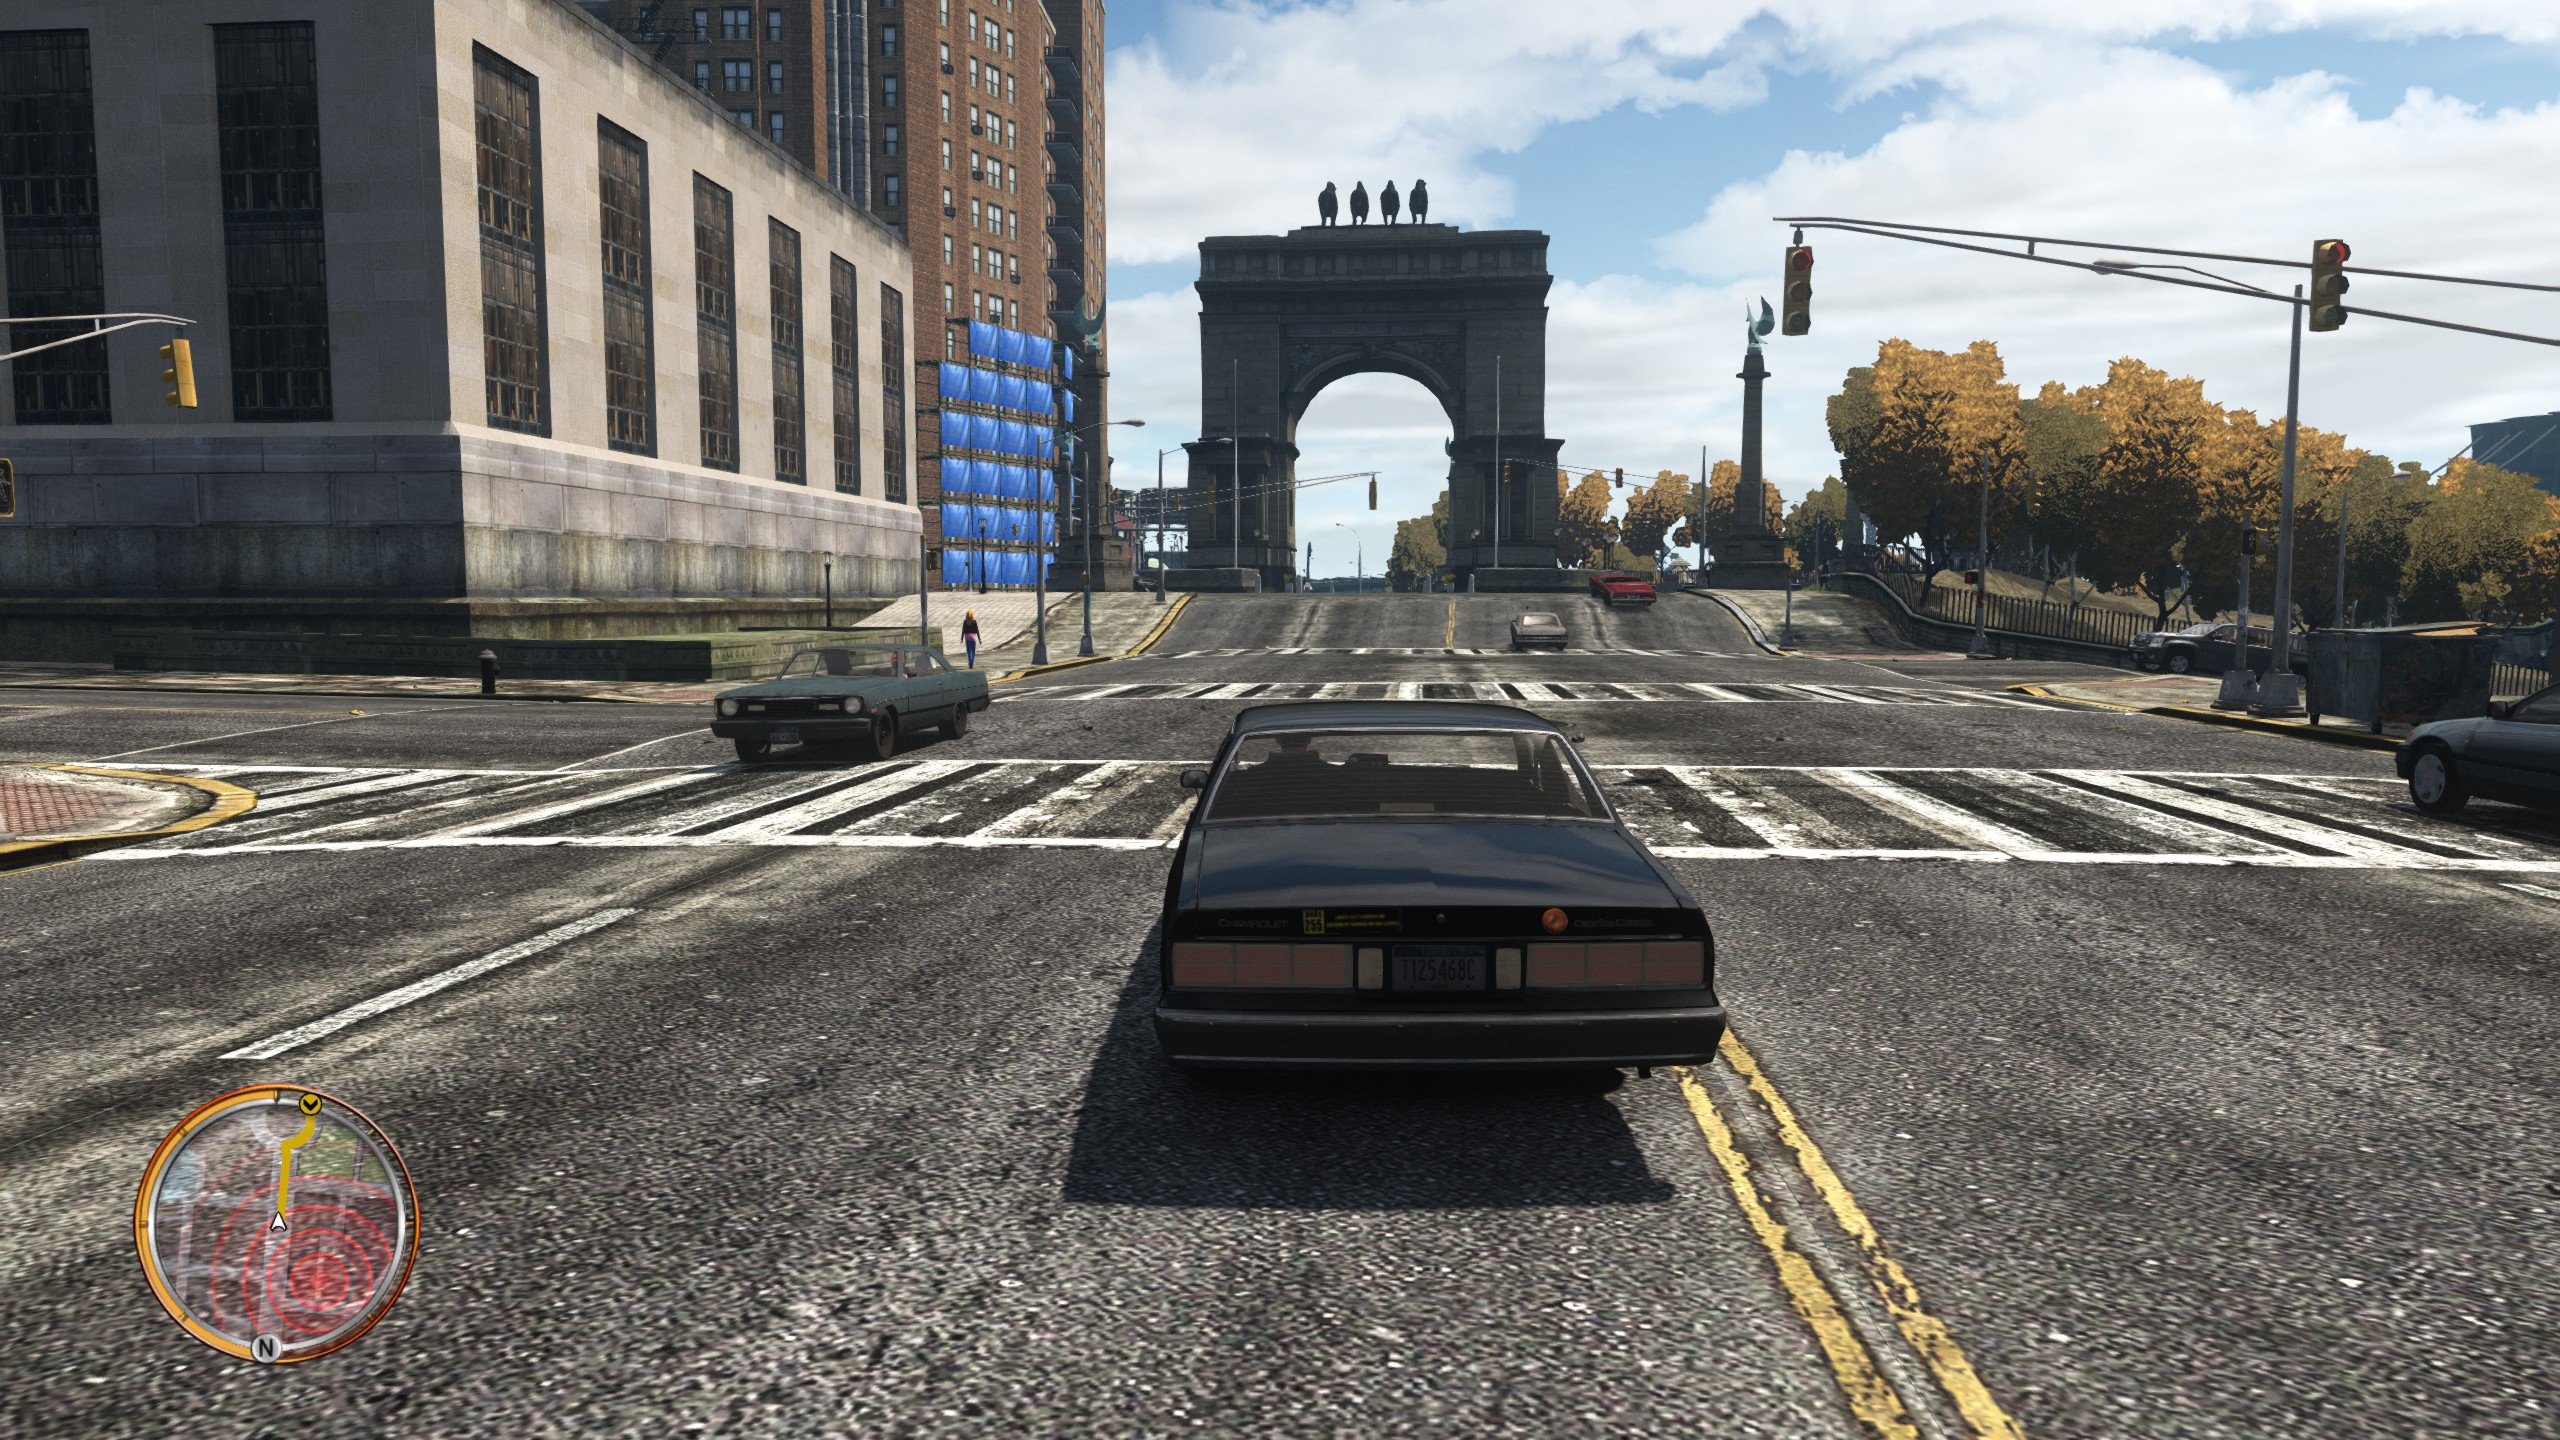 Image 2 - GTA IV Ultimately Beautiful Edition for Steam v1.2.0.43